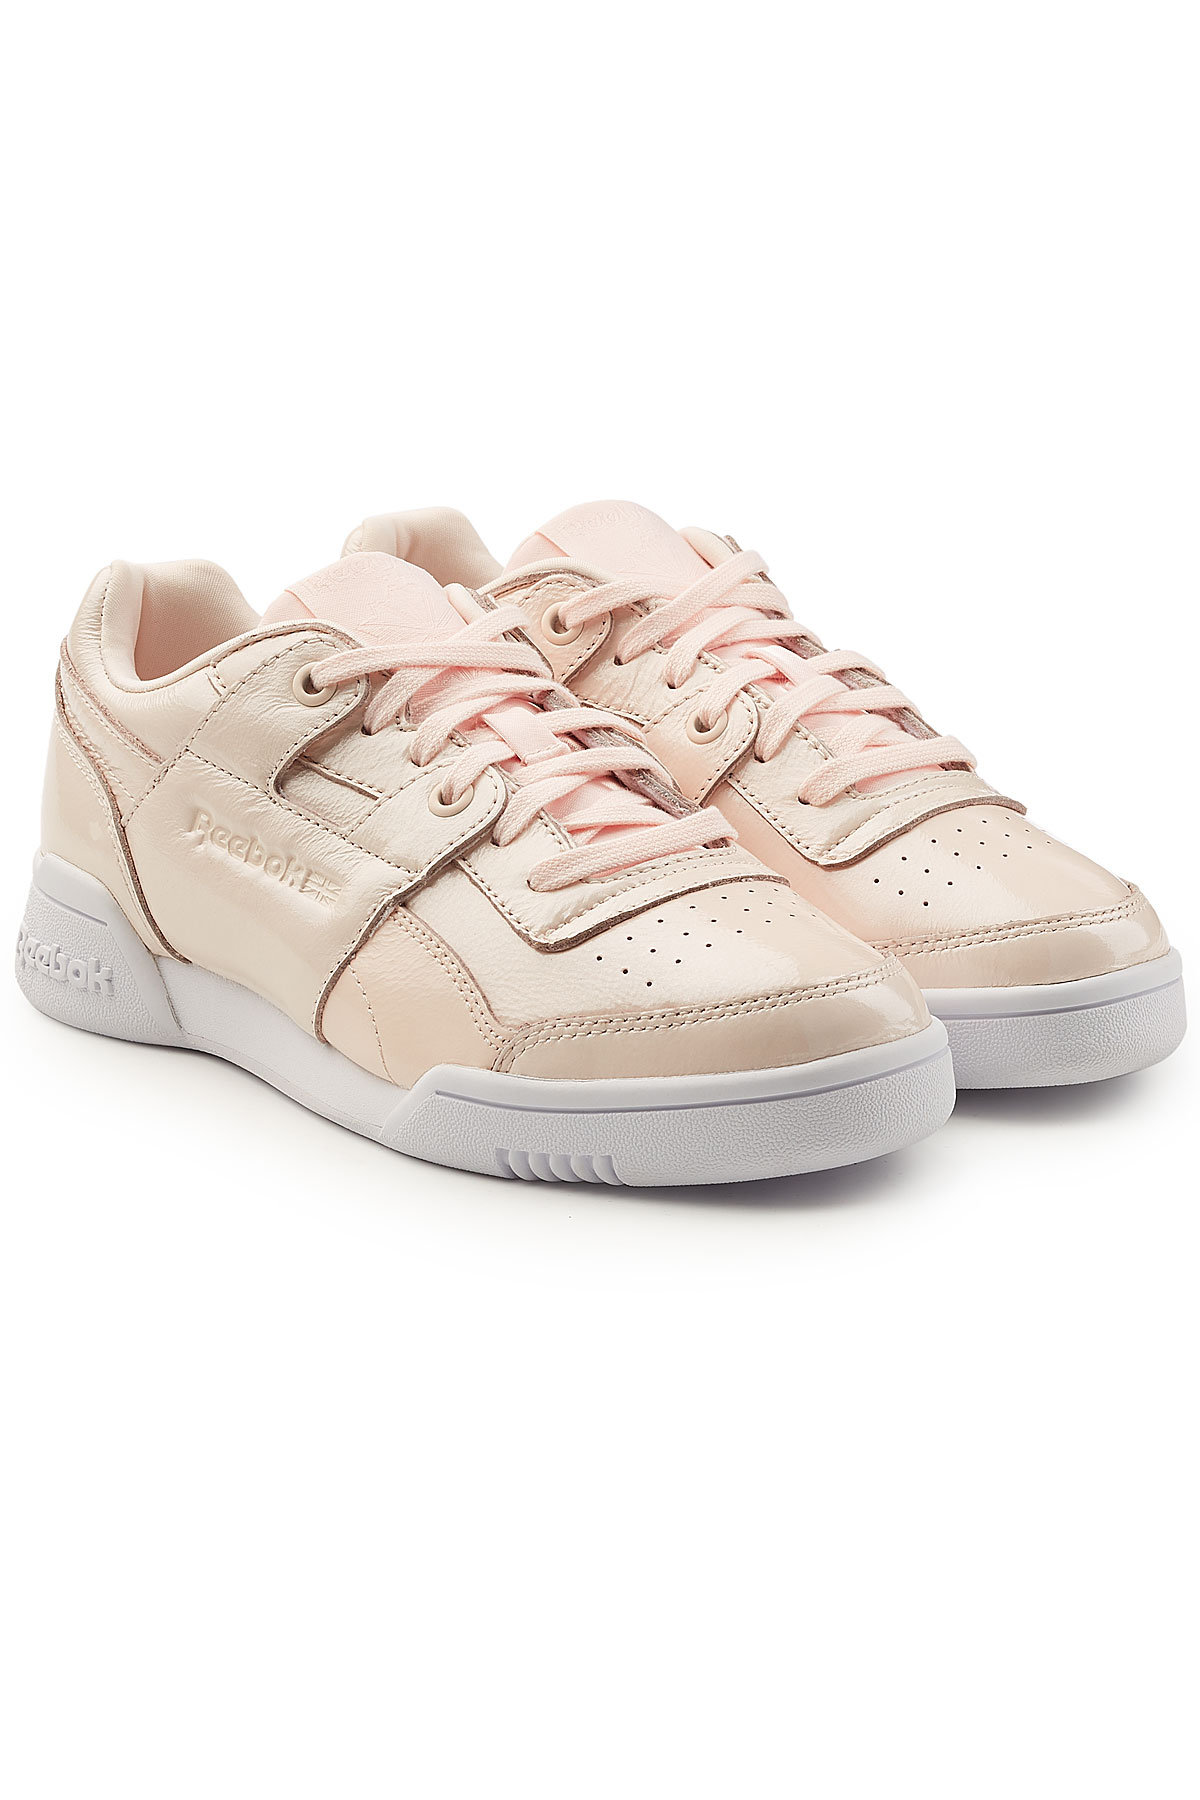 Reebok - Workout Plus Patent Leather Sneakers